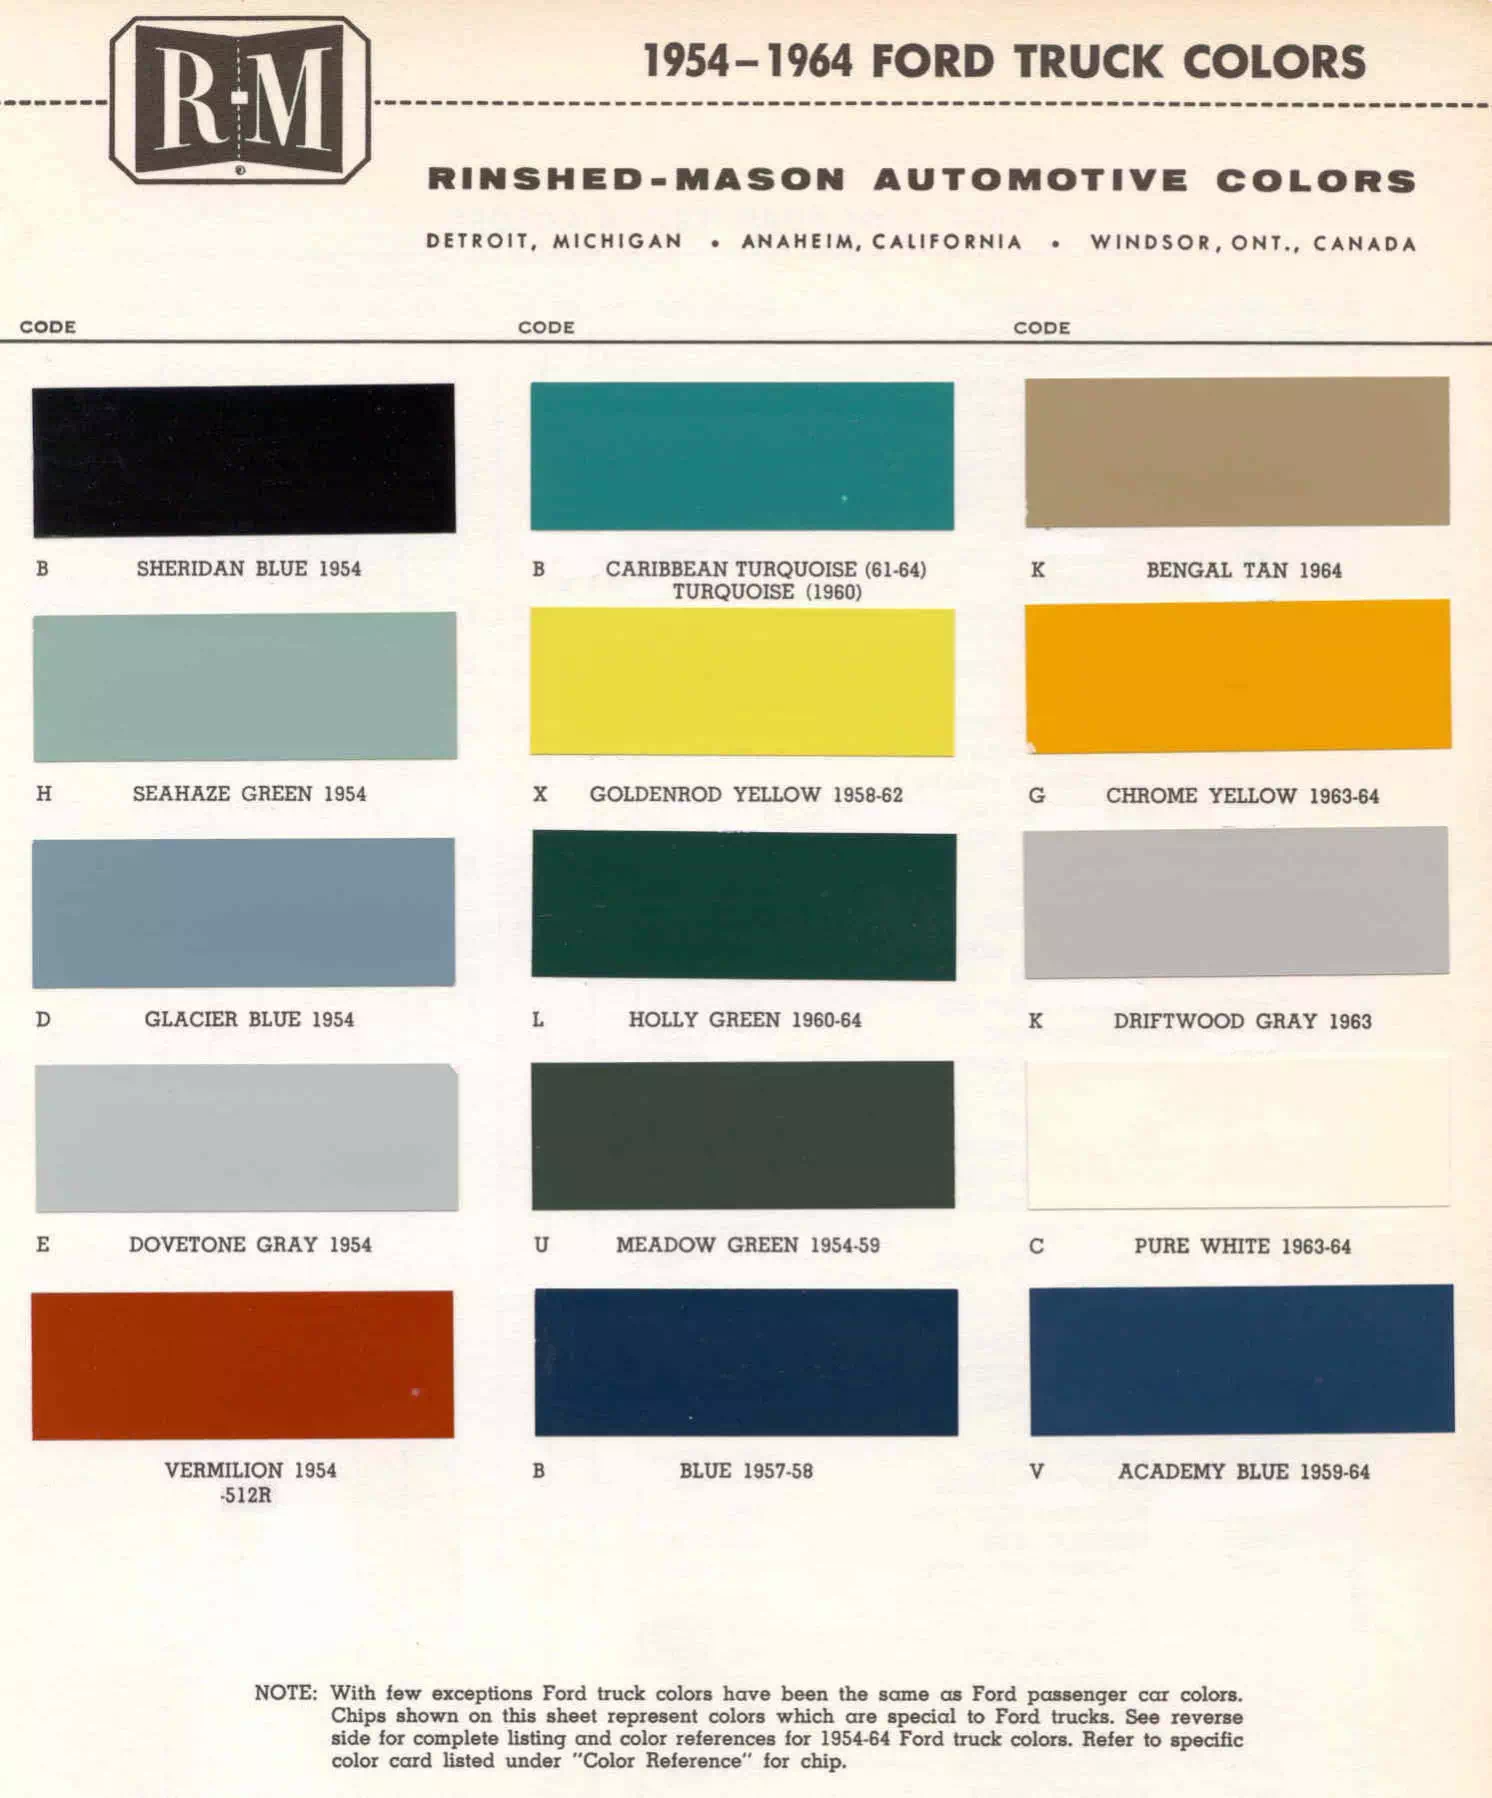 exterior colors, their codes, and example swatches used on the exterior of the vehicles in 1954